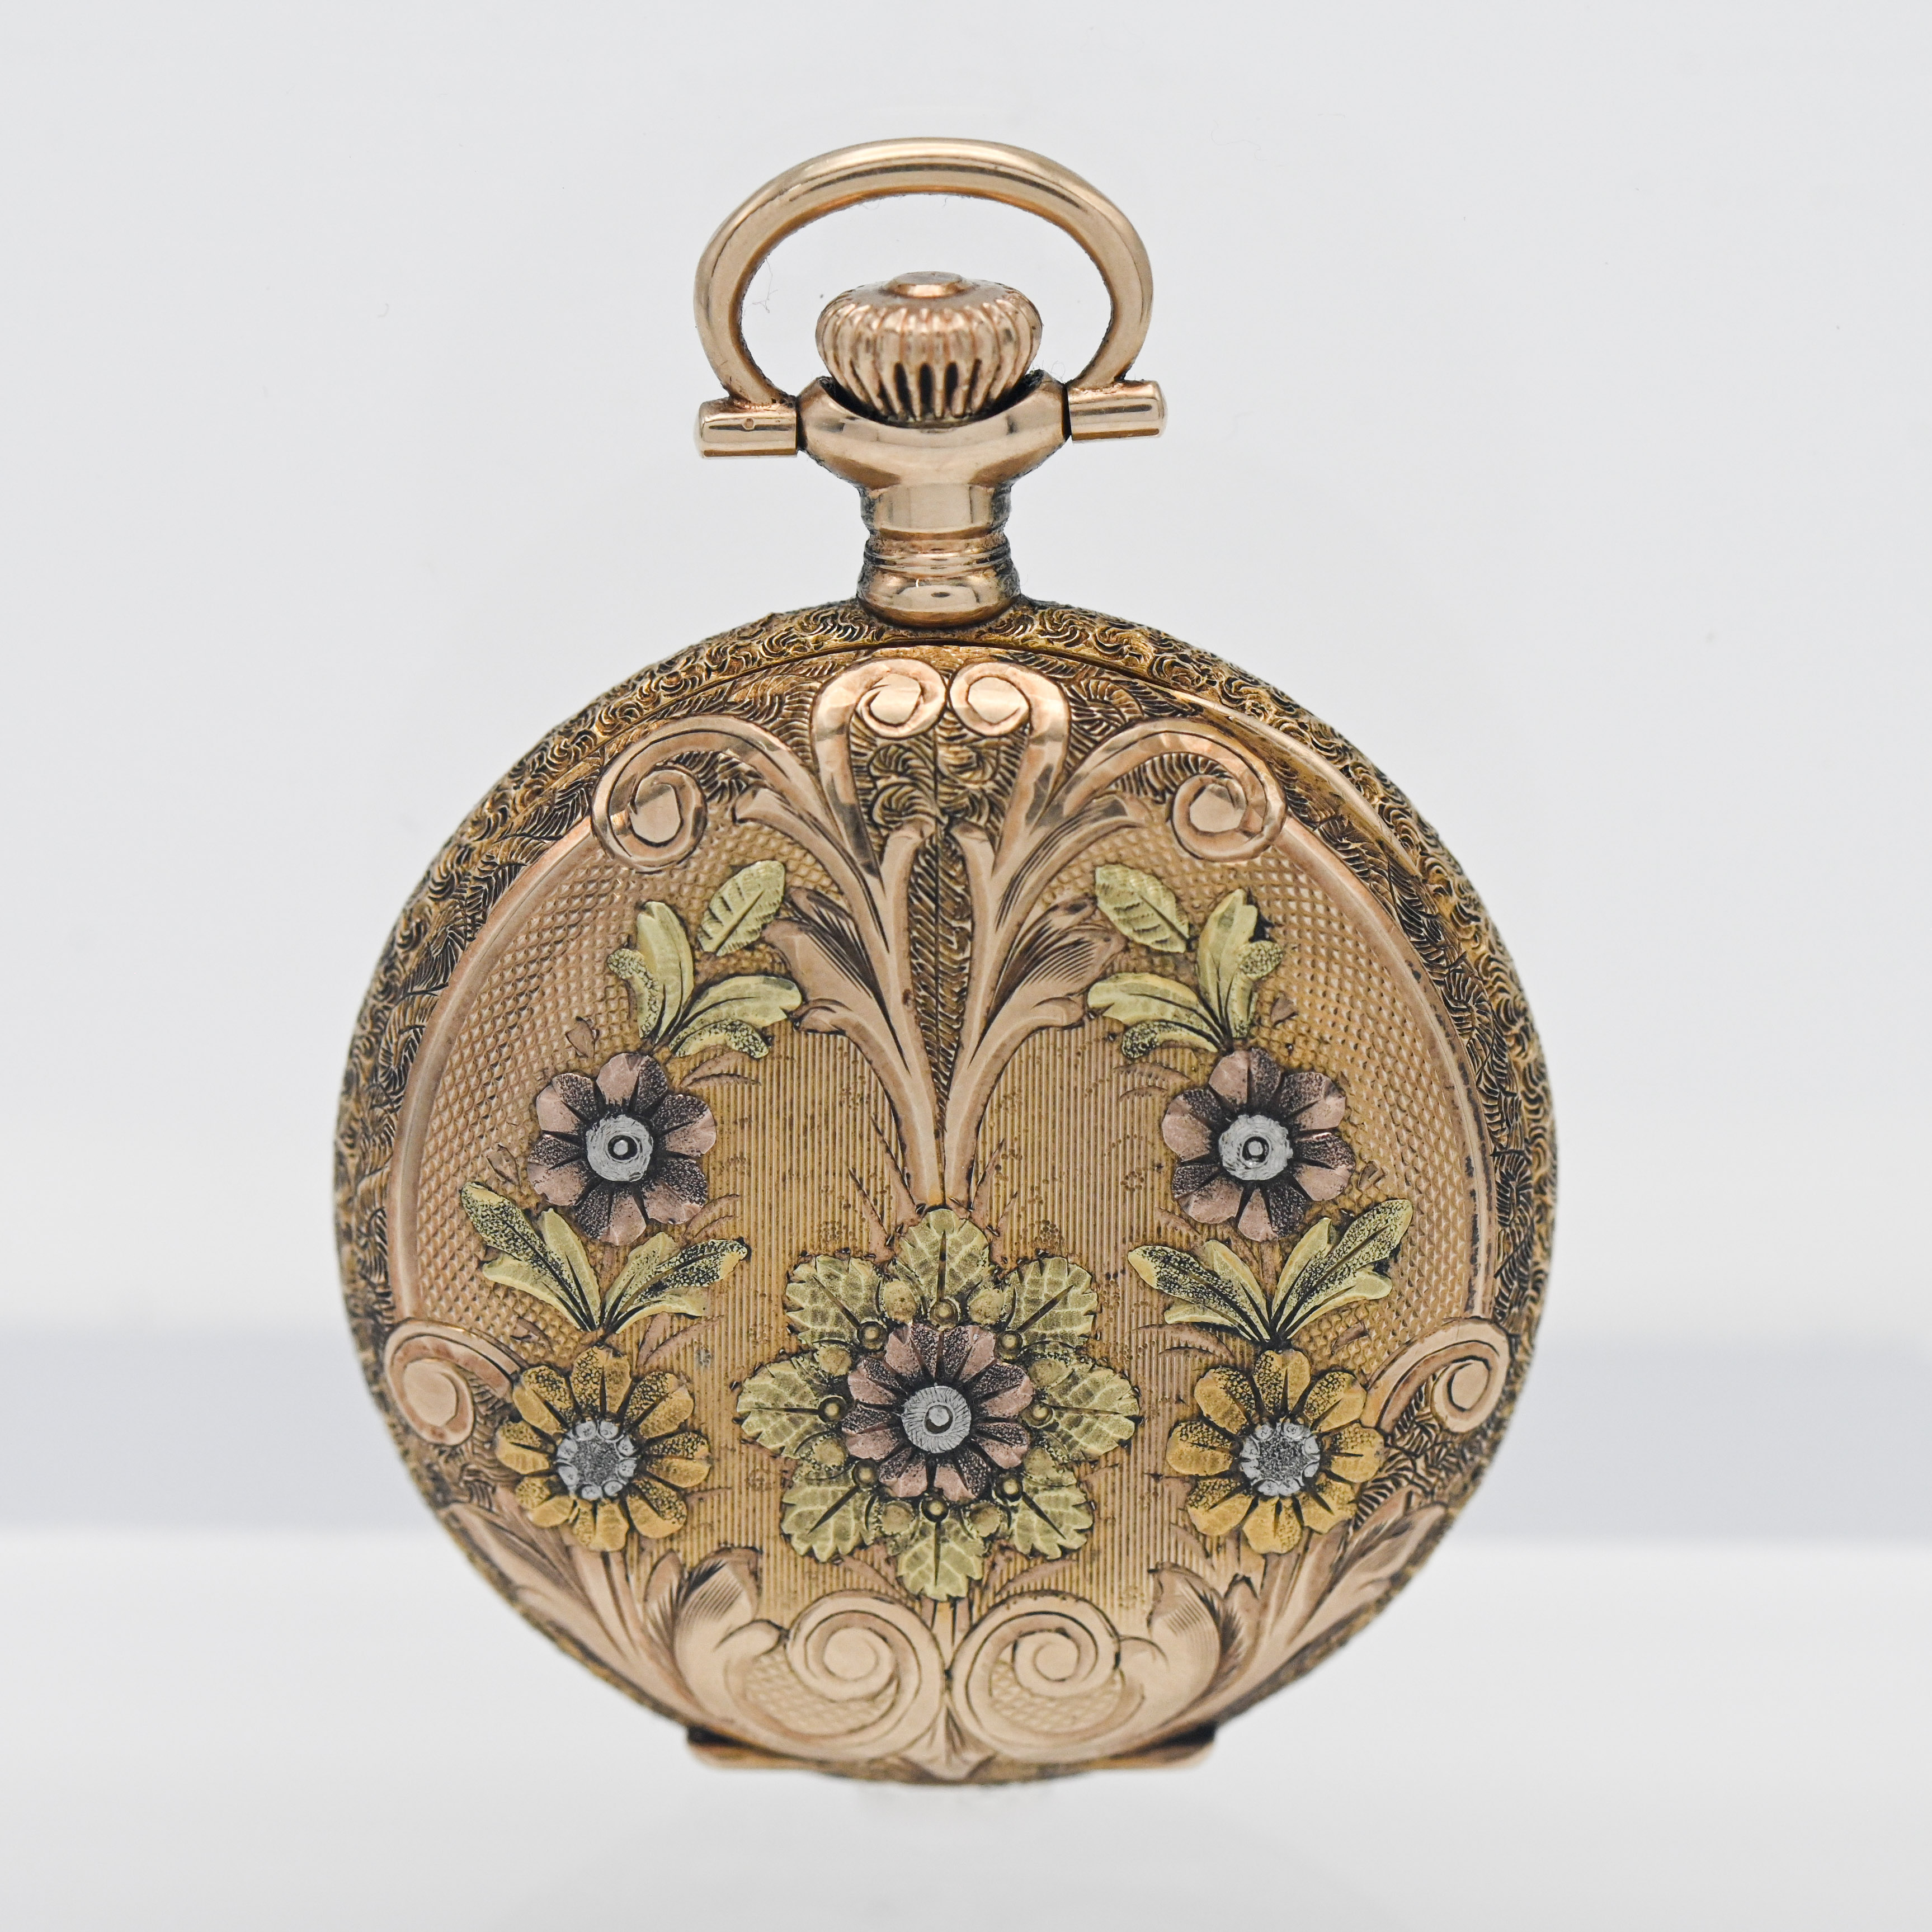 A 14K yellow gold Waltham pendant wind pocket watch, with flower pattern (no inner glass), cased, - Image 2 of 4